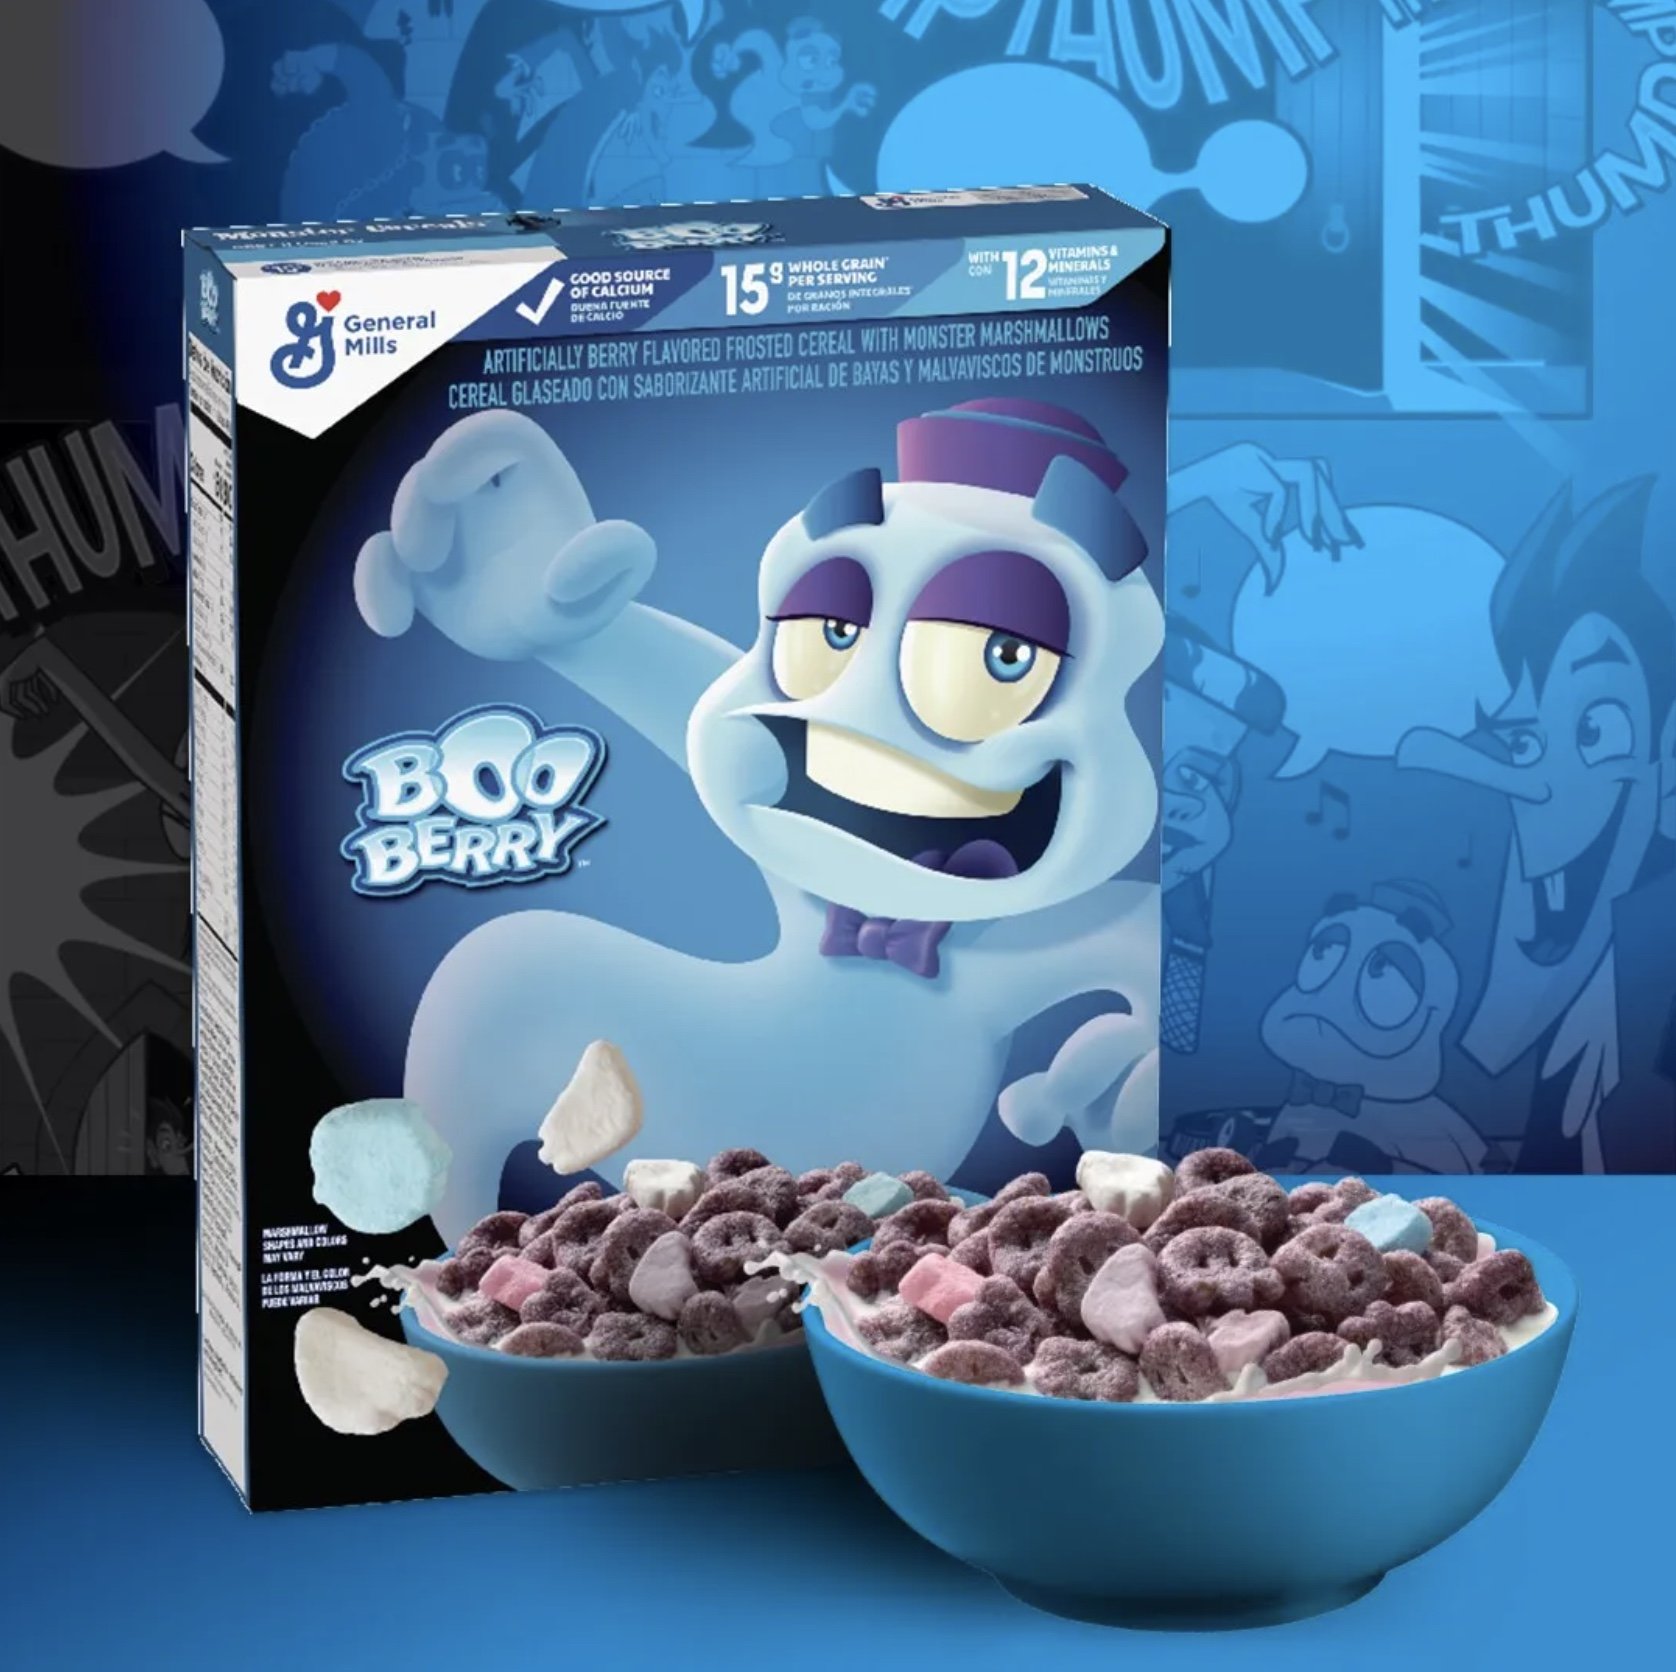 General Mills Announces The First New Monster Cereal in 35 Years with ...